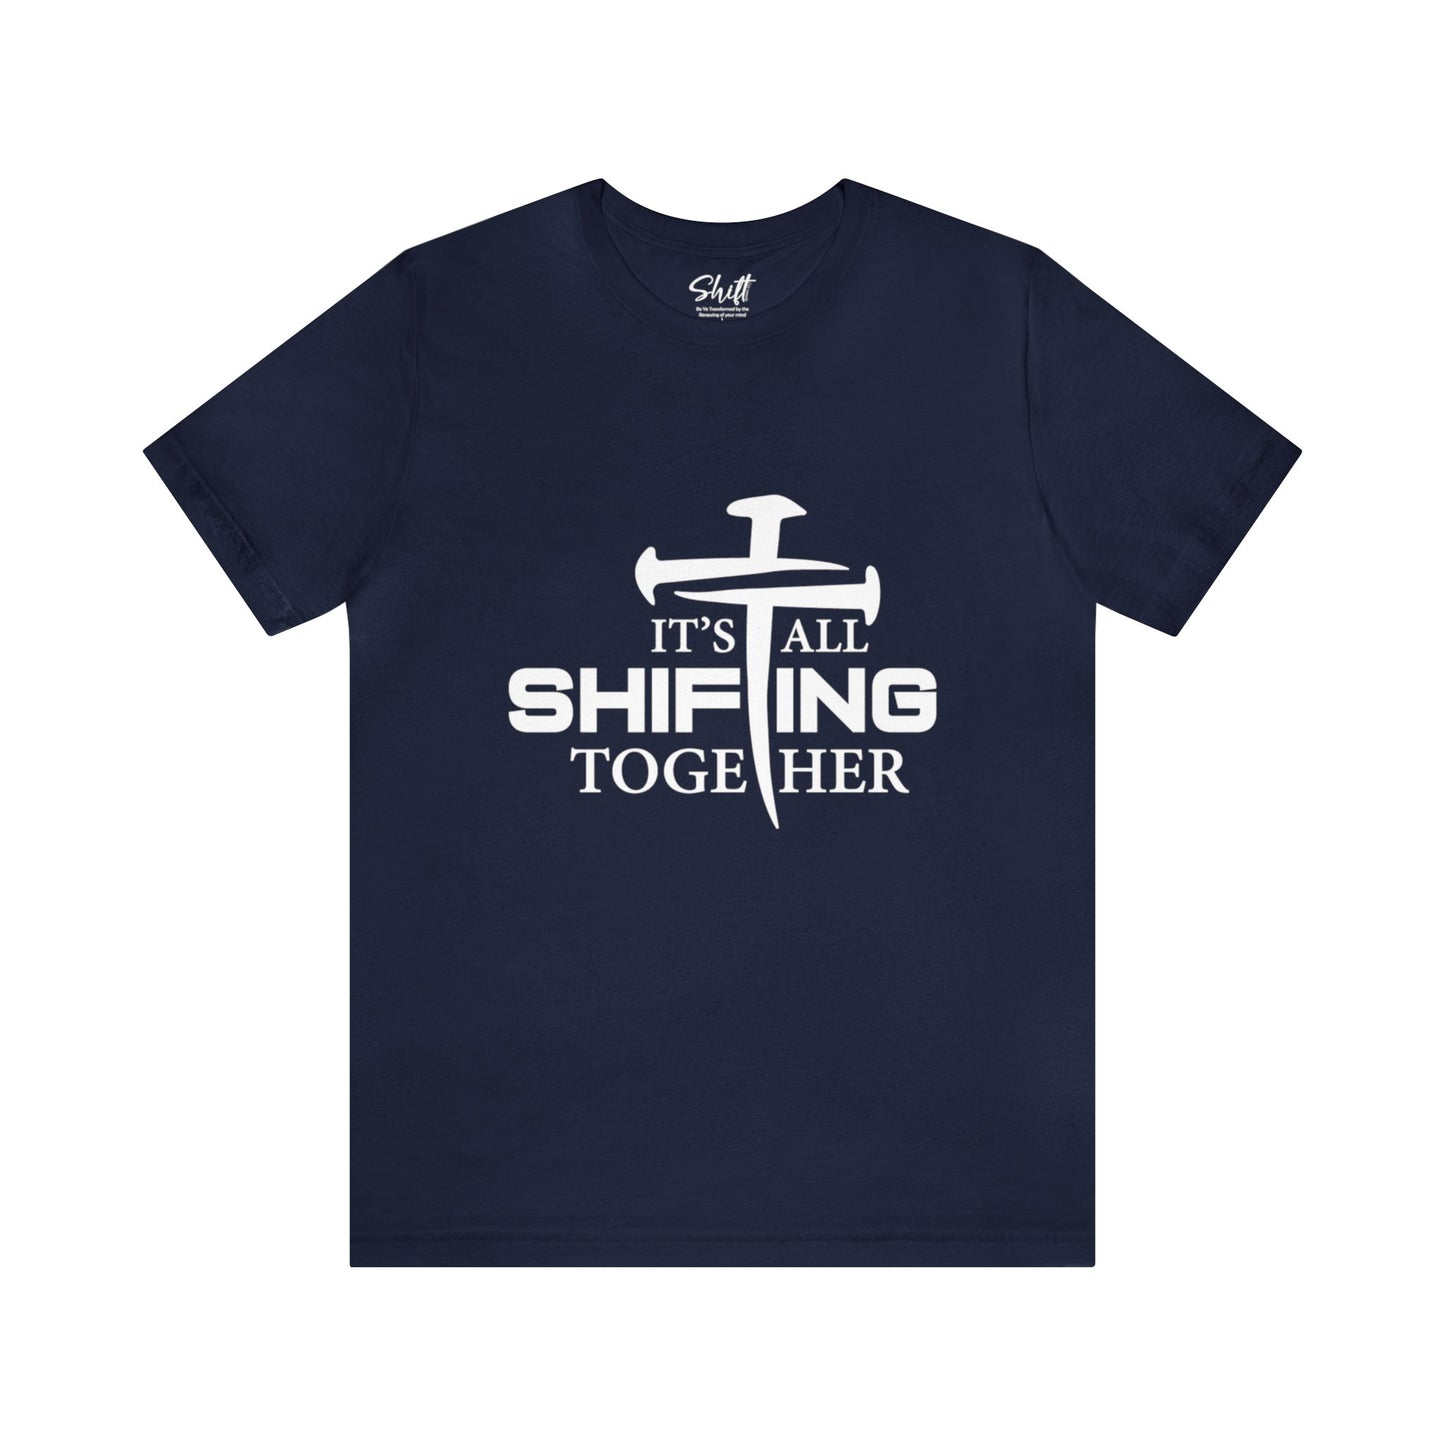 It's all shifting together Unisex Short Sleeve Tee white text